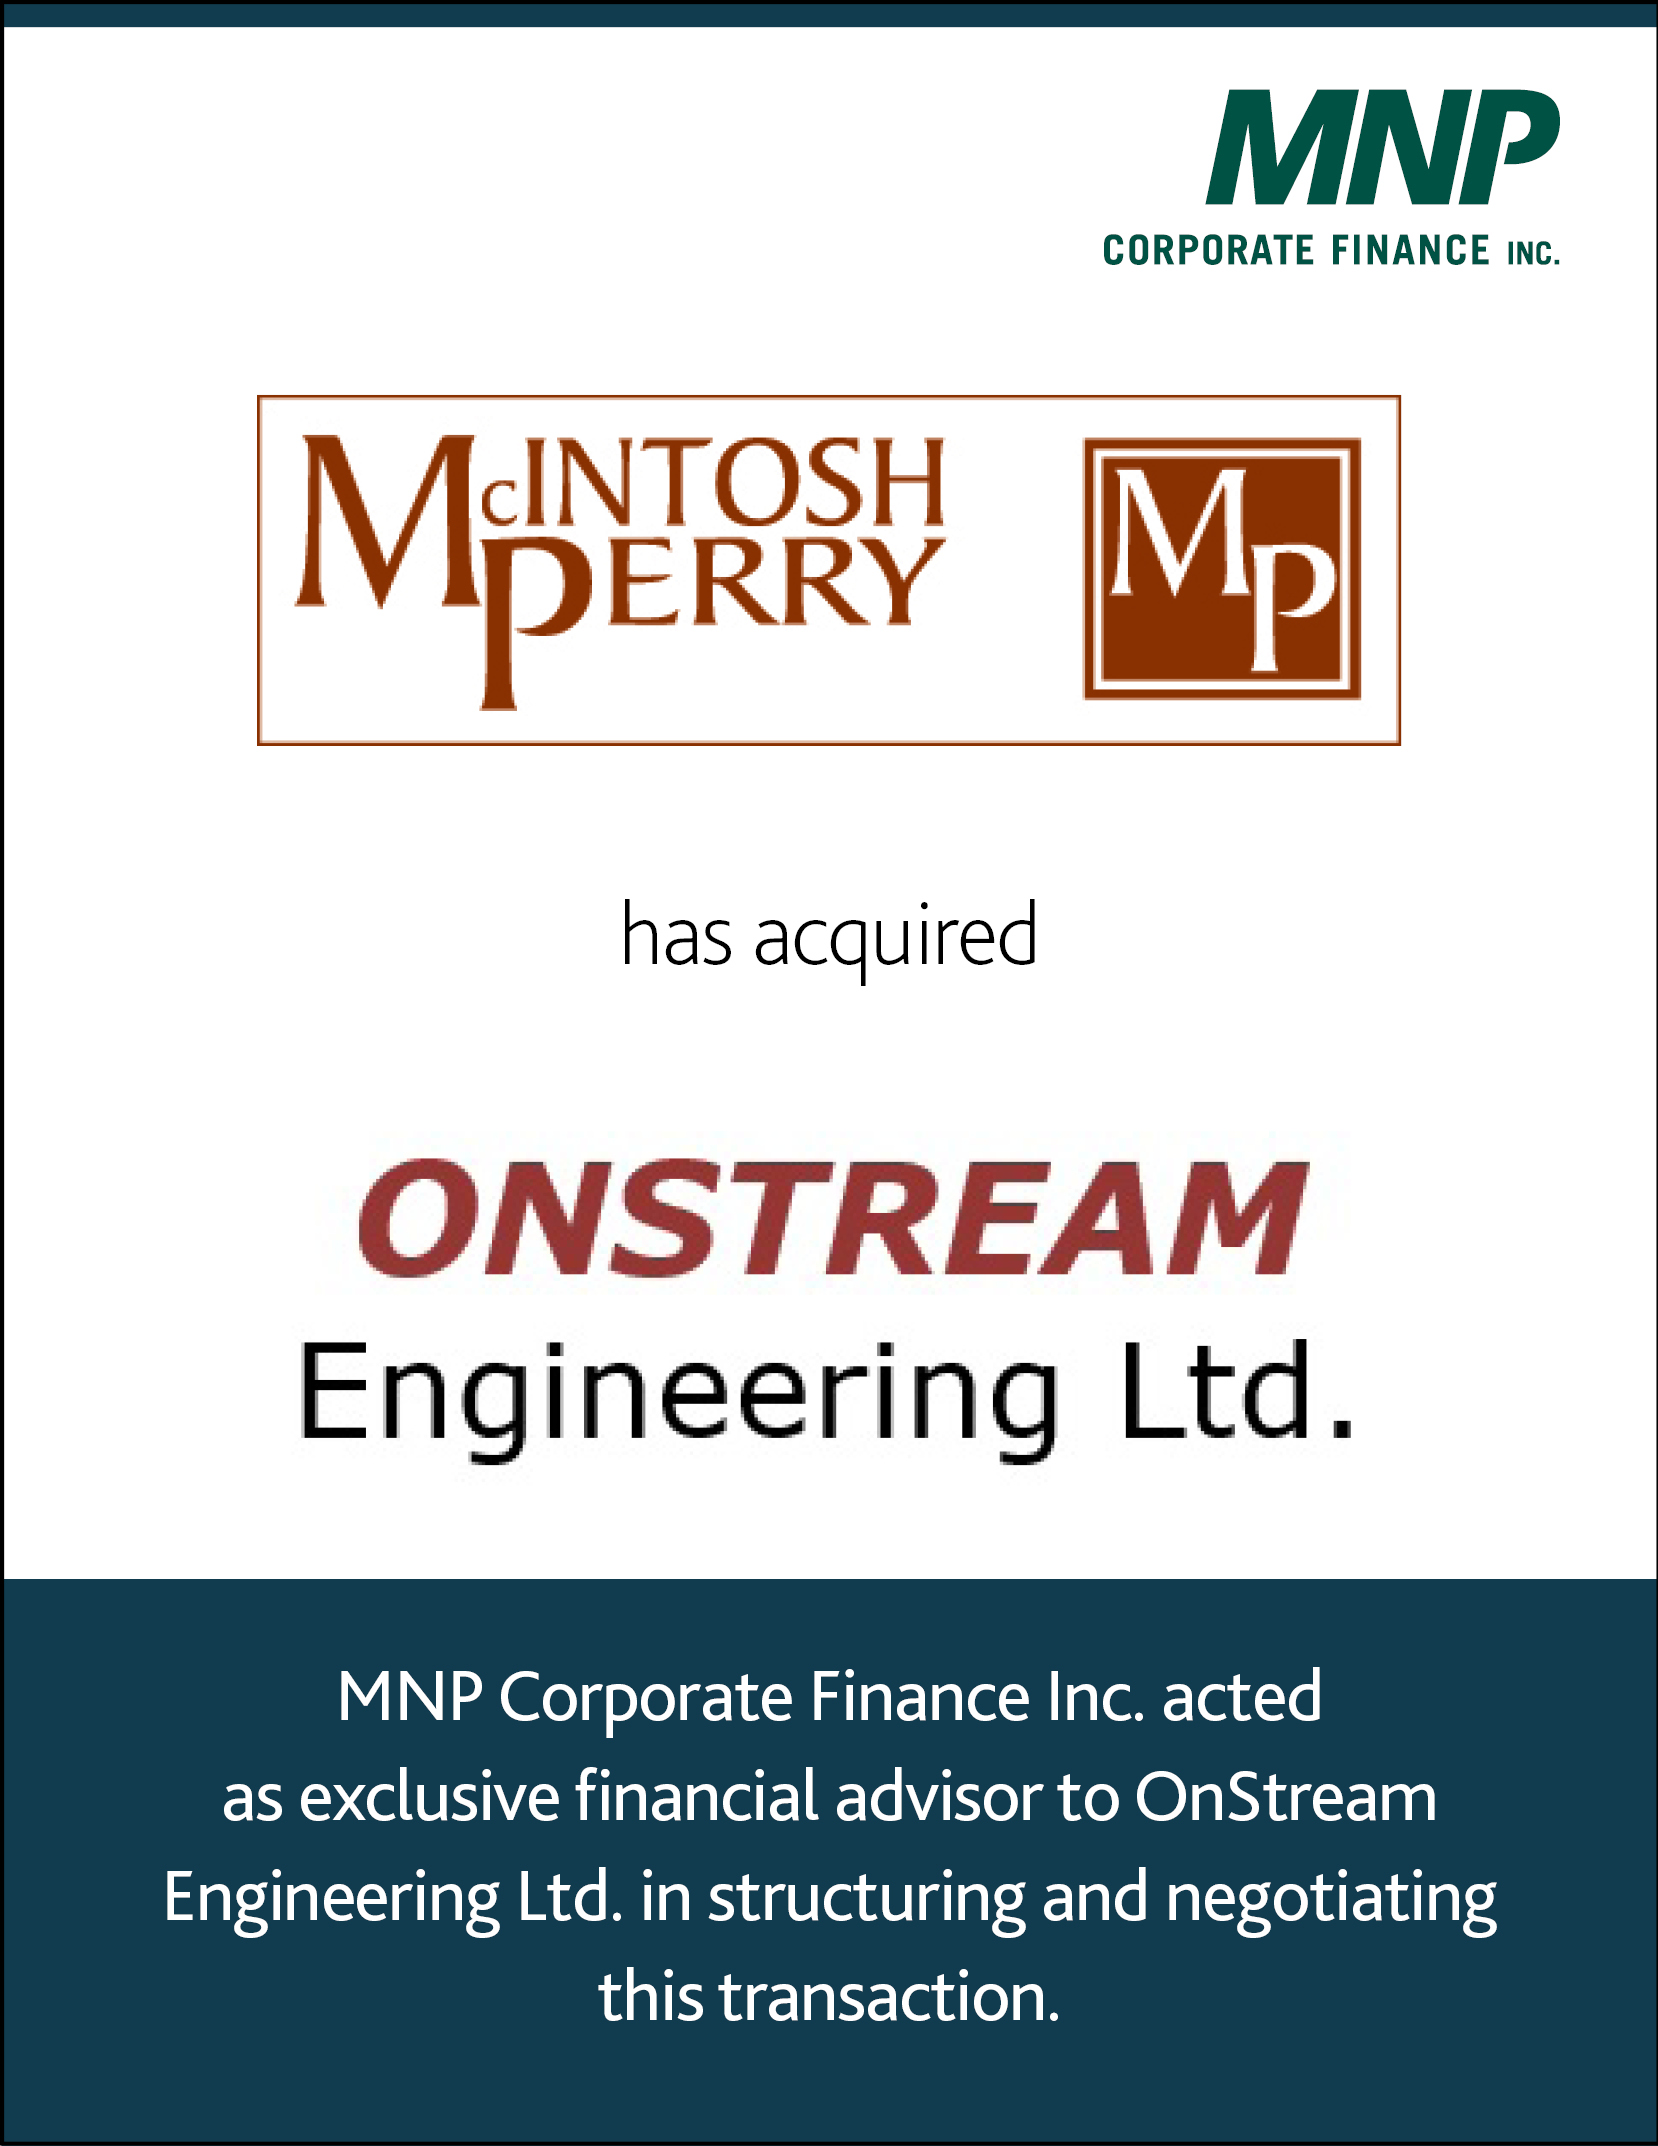 McIntosh Perry has acquired OnStream Engineering Ltd.